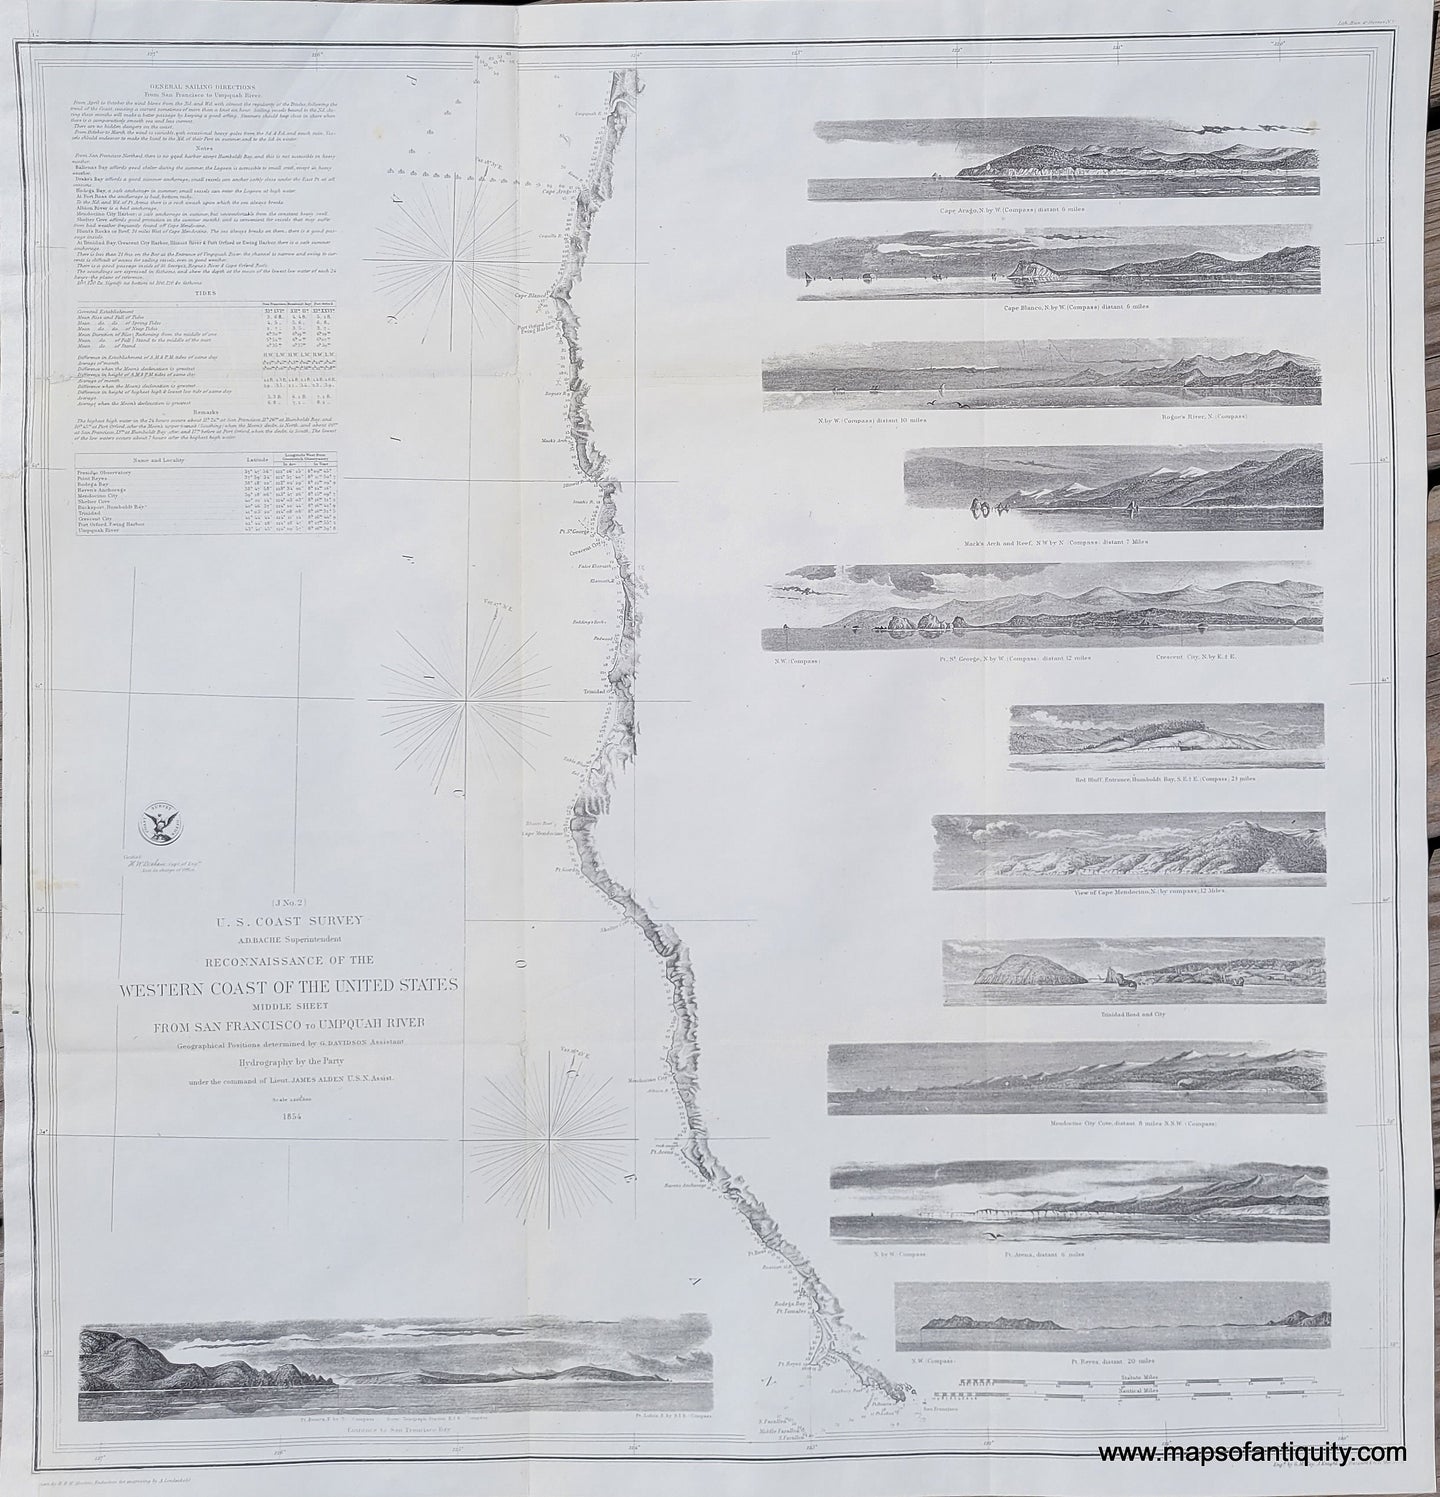 Antique-Coastal-Chart-Reconnaissance-of-the-Western-Coast-of-the-United-States-Middle-Sheet-from-San-Francisco-to-Umpquah-River.--United-States-West-1854-U.S.C.S.-Maps-Of-Antiquity